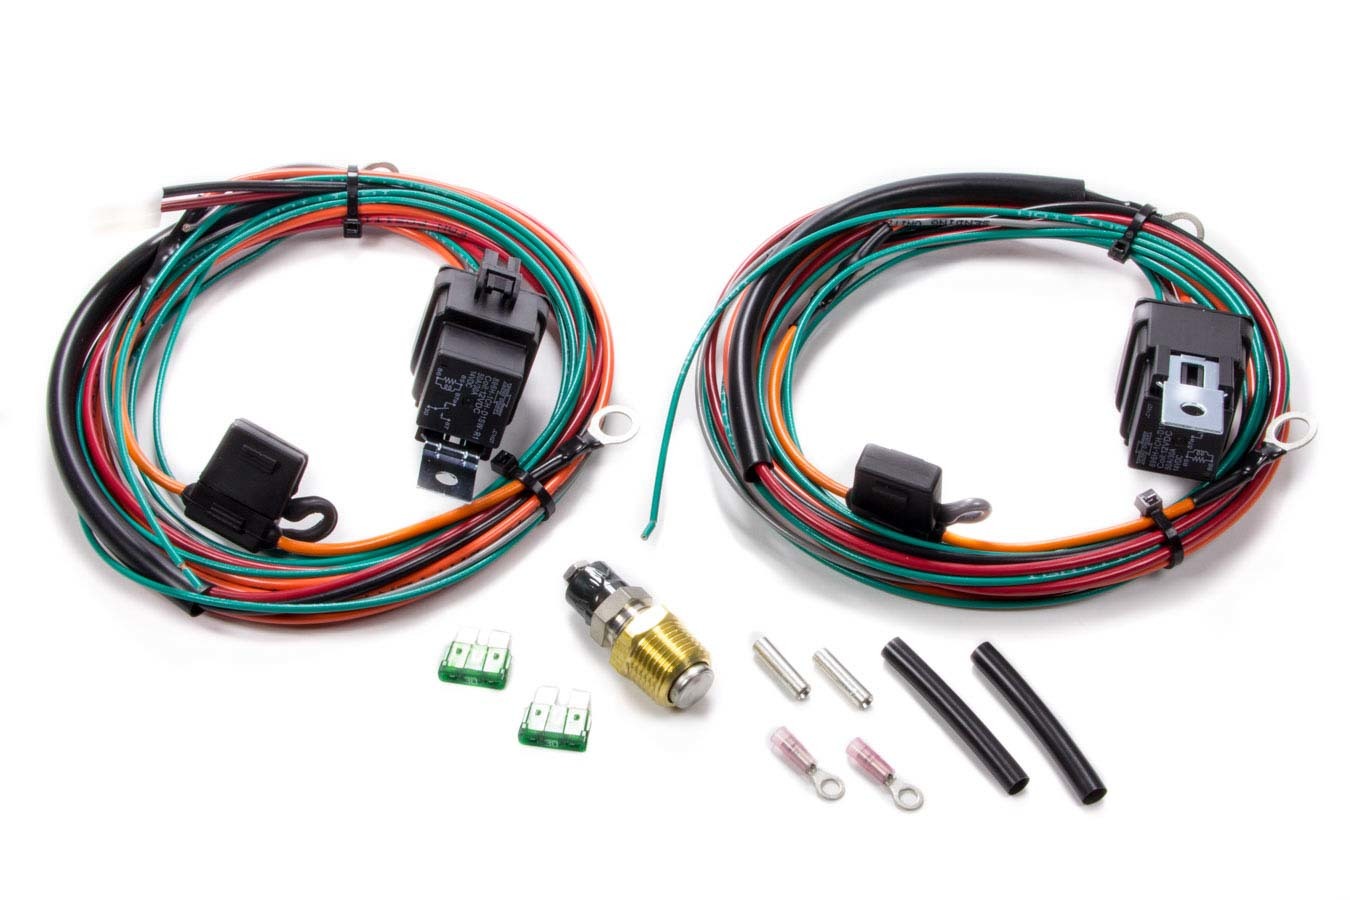 Wiring Harness Kit For Dual Fans - 75117